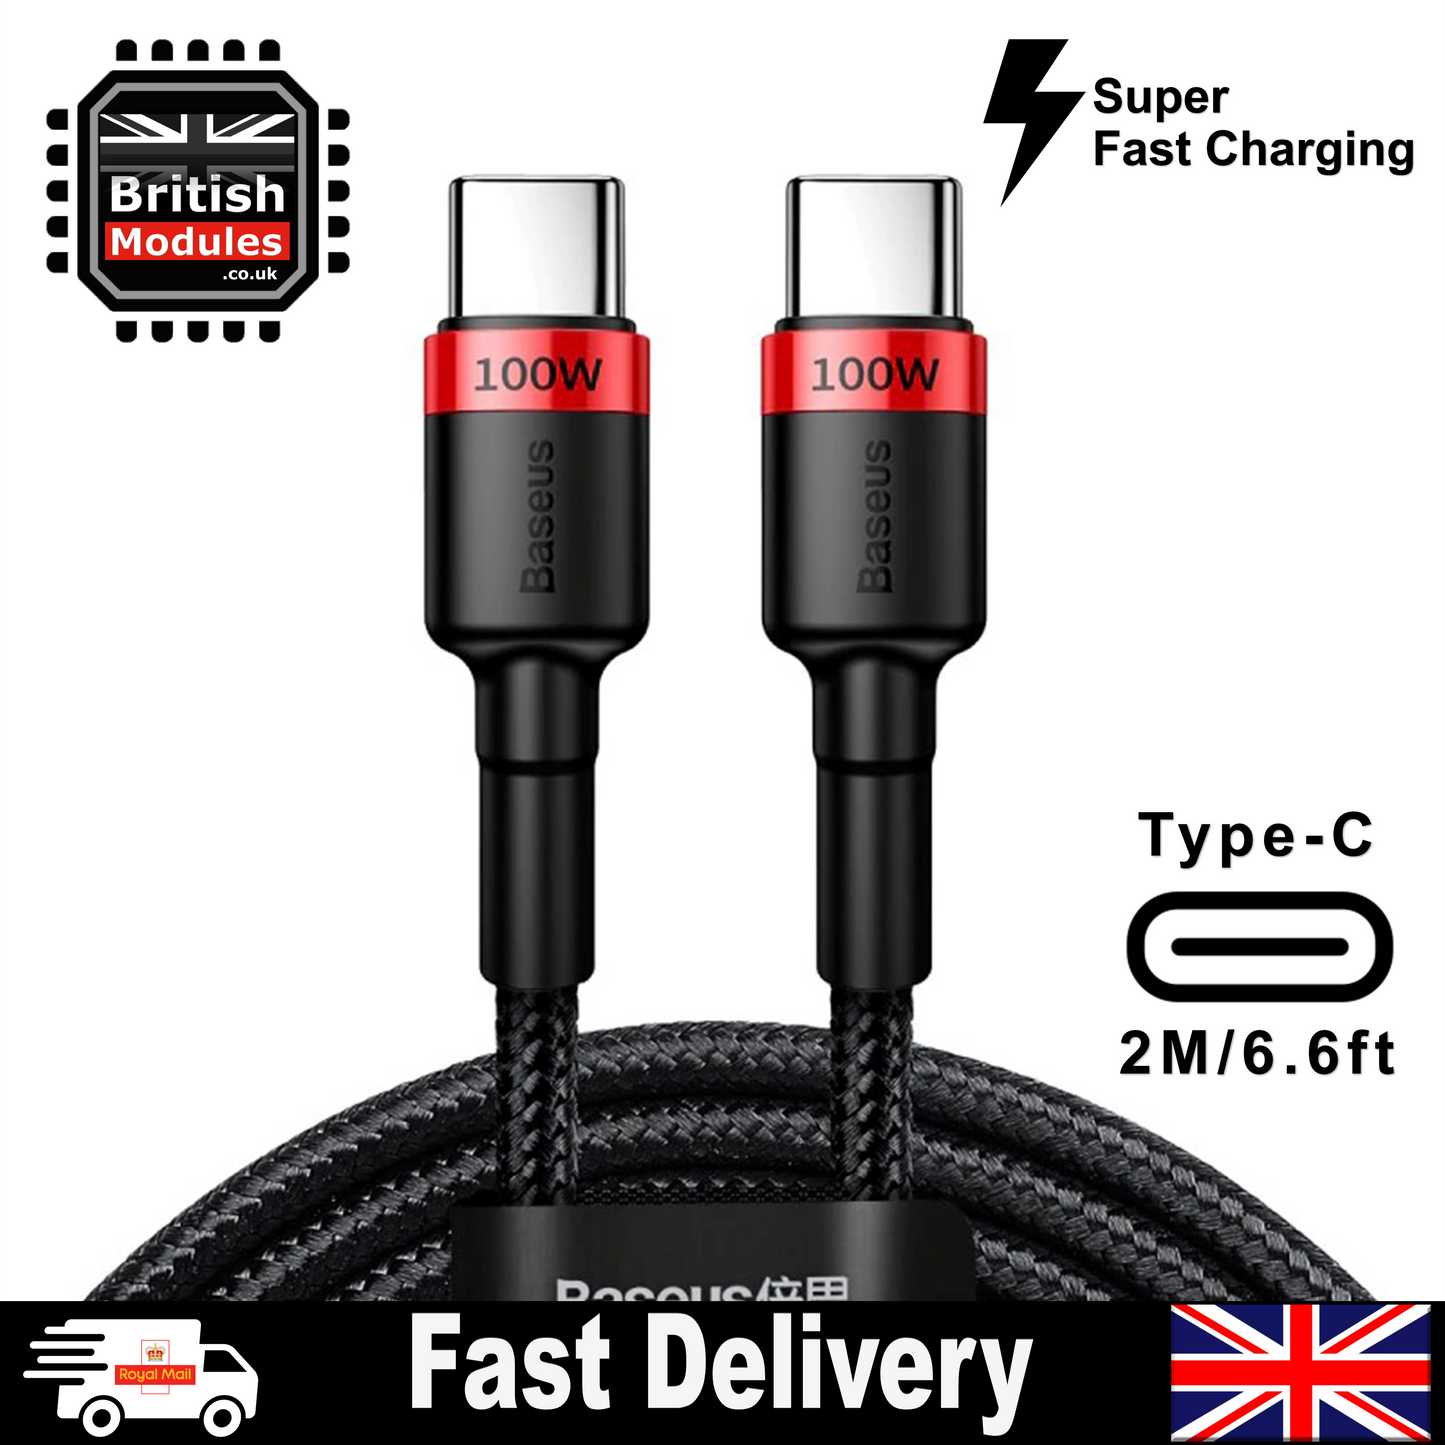 2M USB C To Type C Cable Super Fast Charger PD 100W for Samsung iPhone MacBook iPad Black/Red